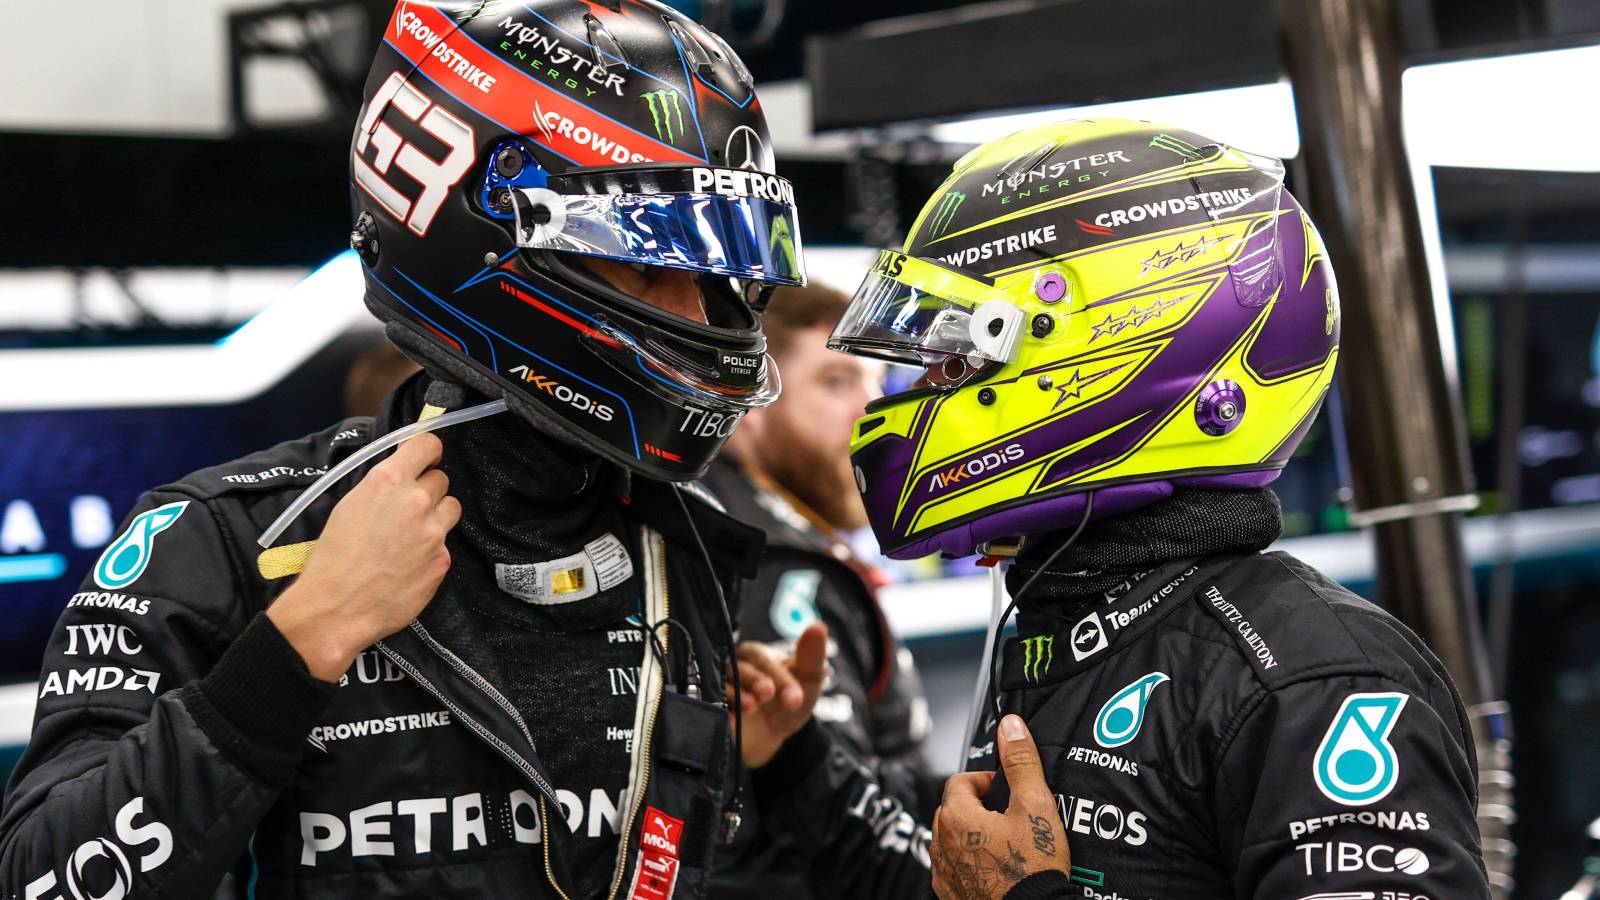 George Russell and Lewis Hamilton speaking together. Jeddah, March 2022.